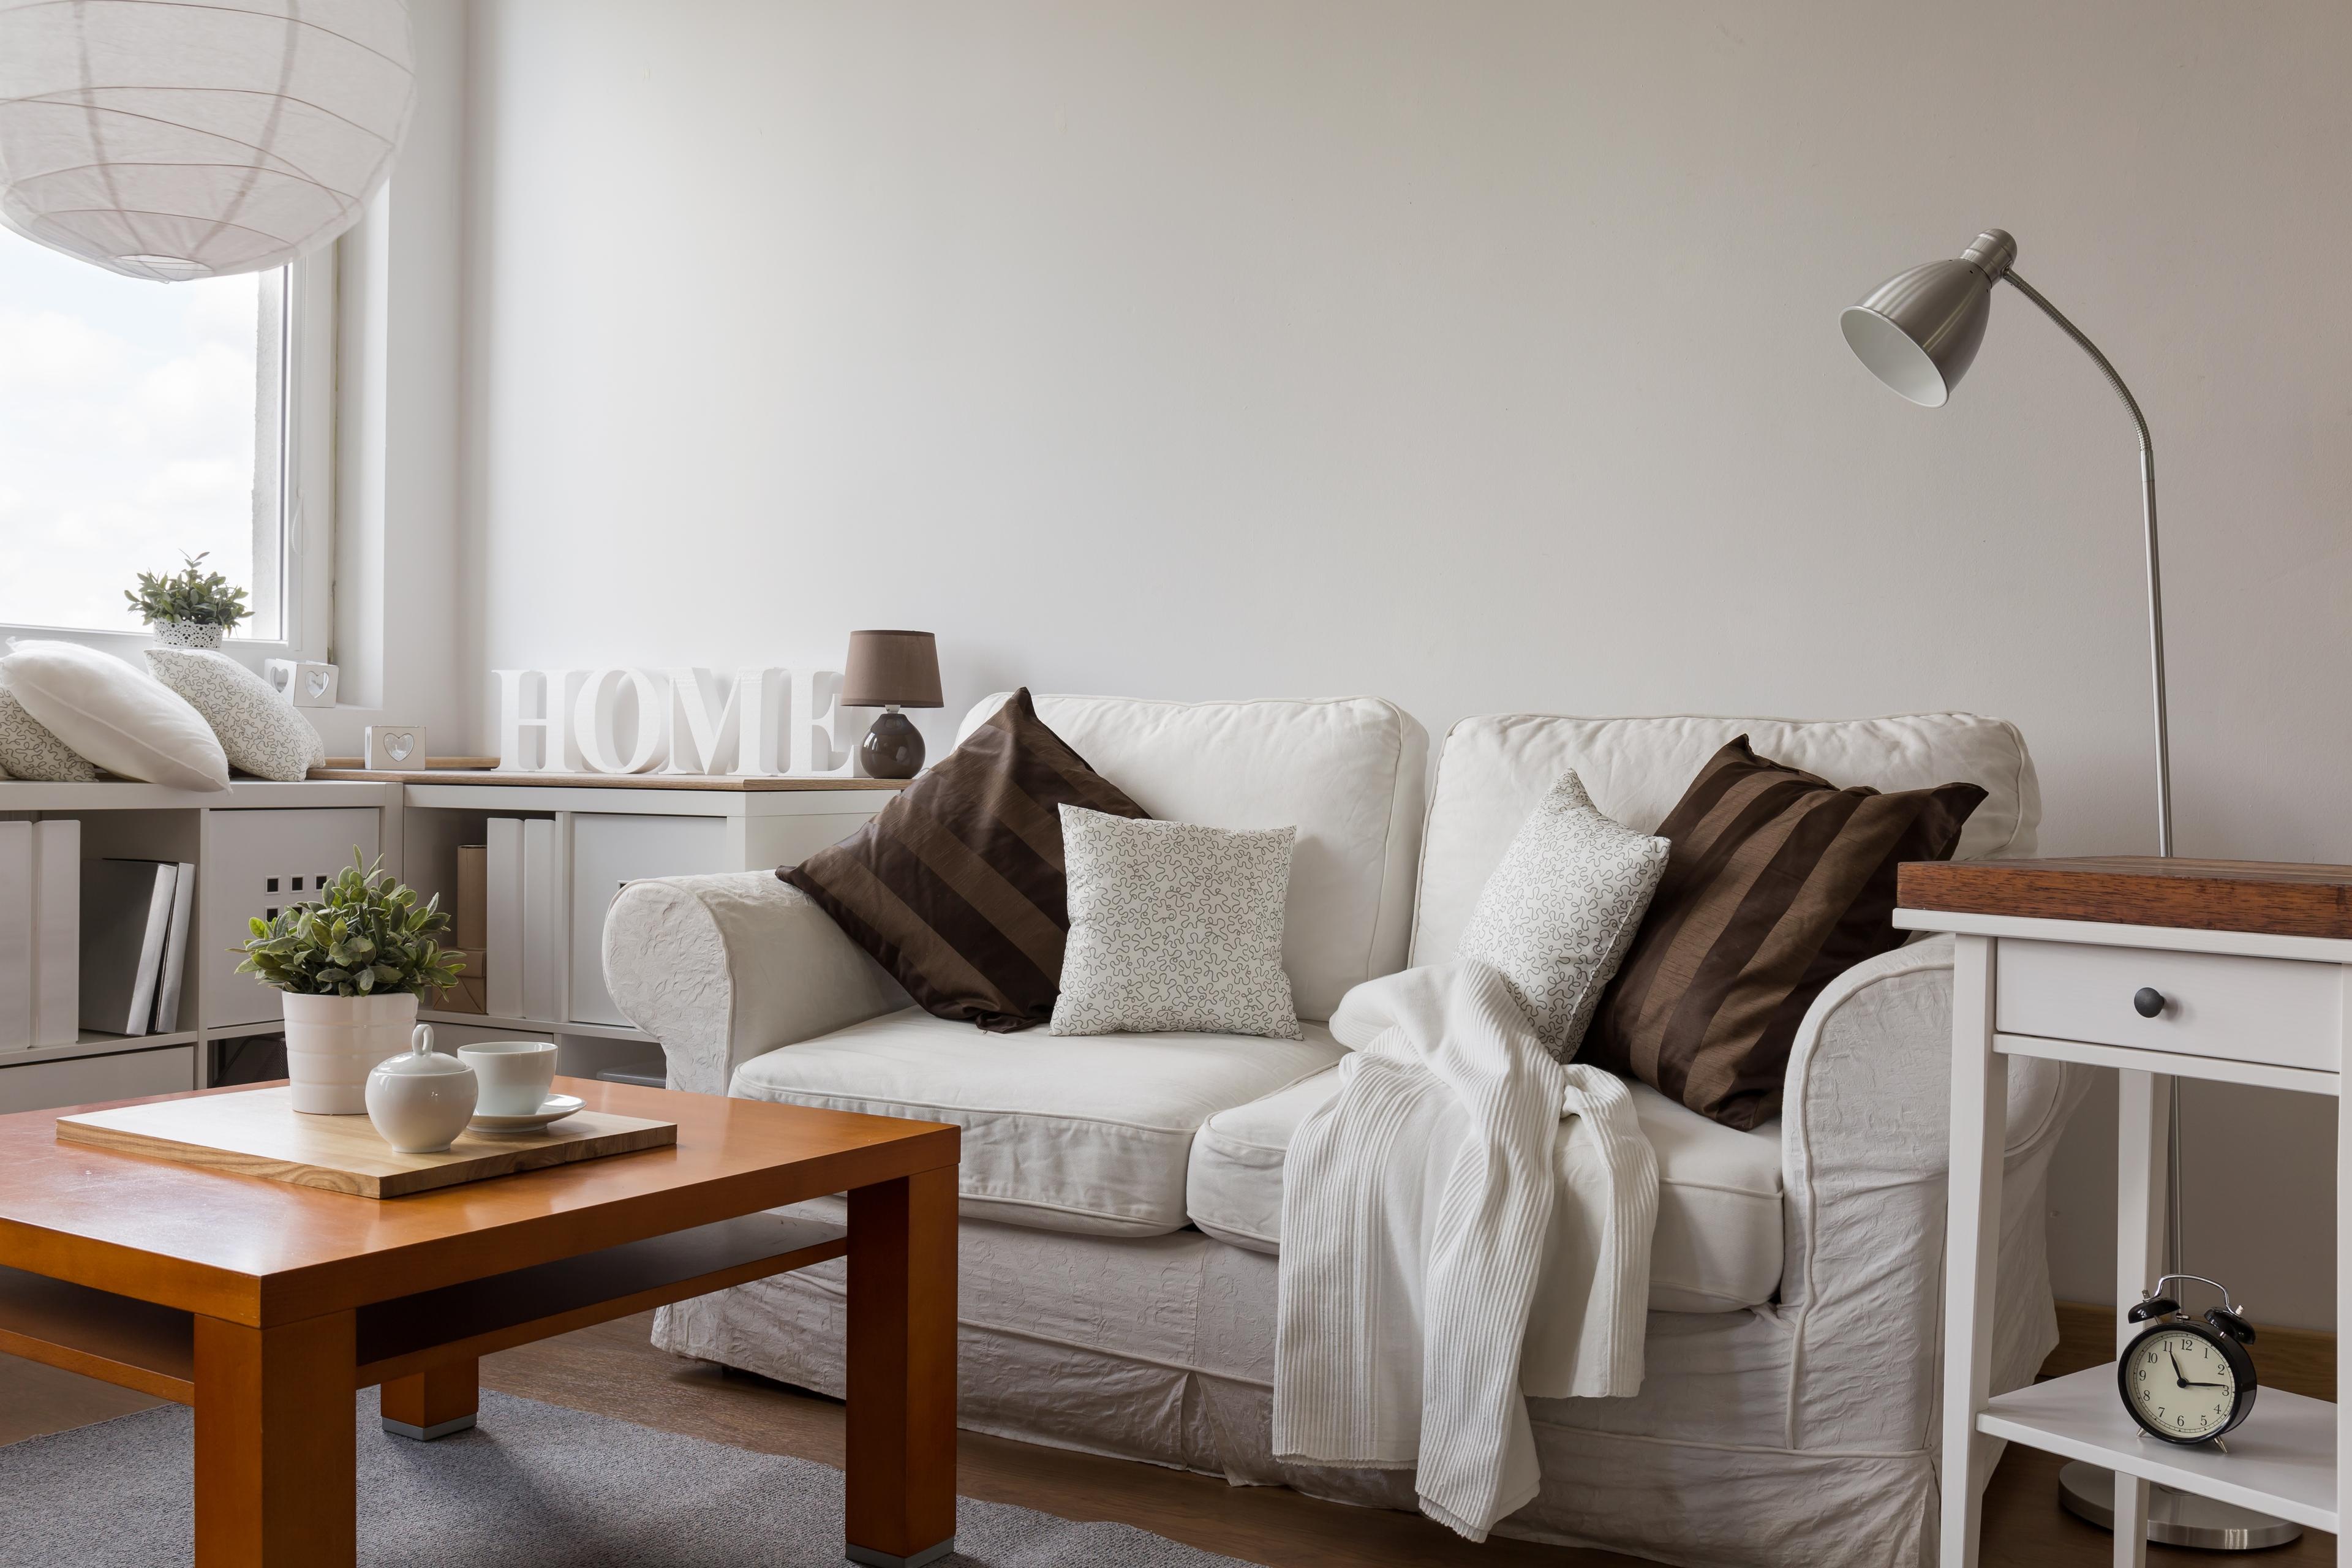 A welcoming home scene: sofa, coffee table, lamp, and bright natural light through open window create cozy ambiance.